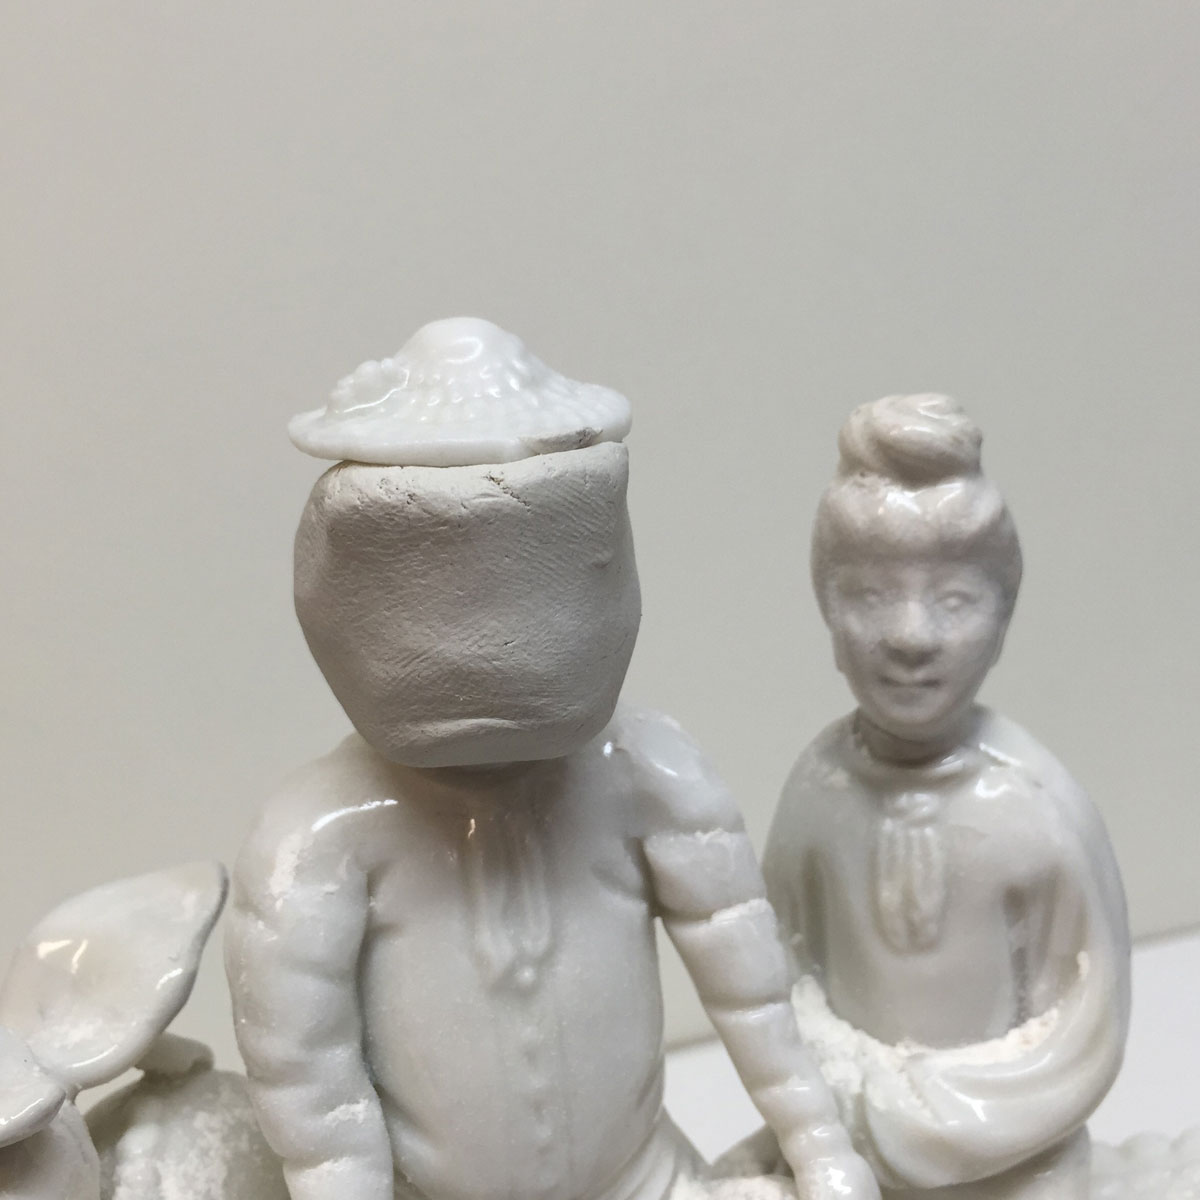 Two white porcelain figures, one with an clay mould on its face